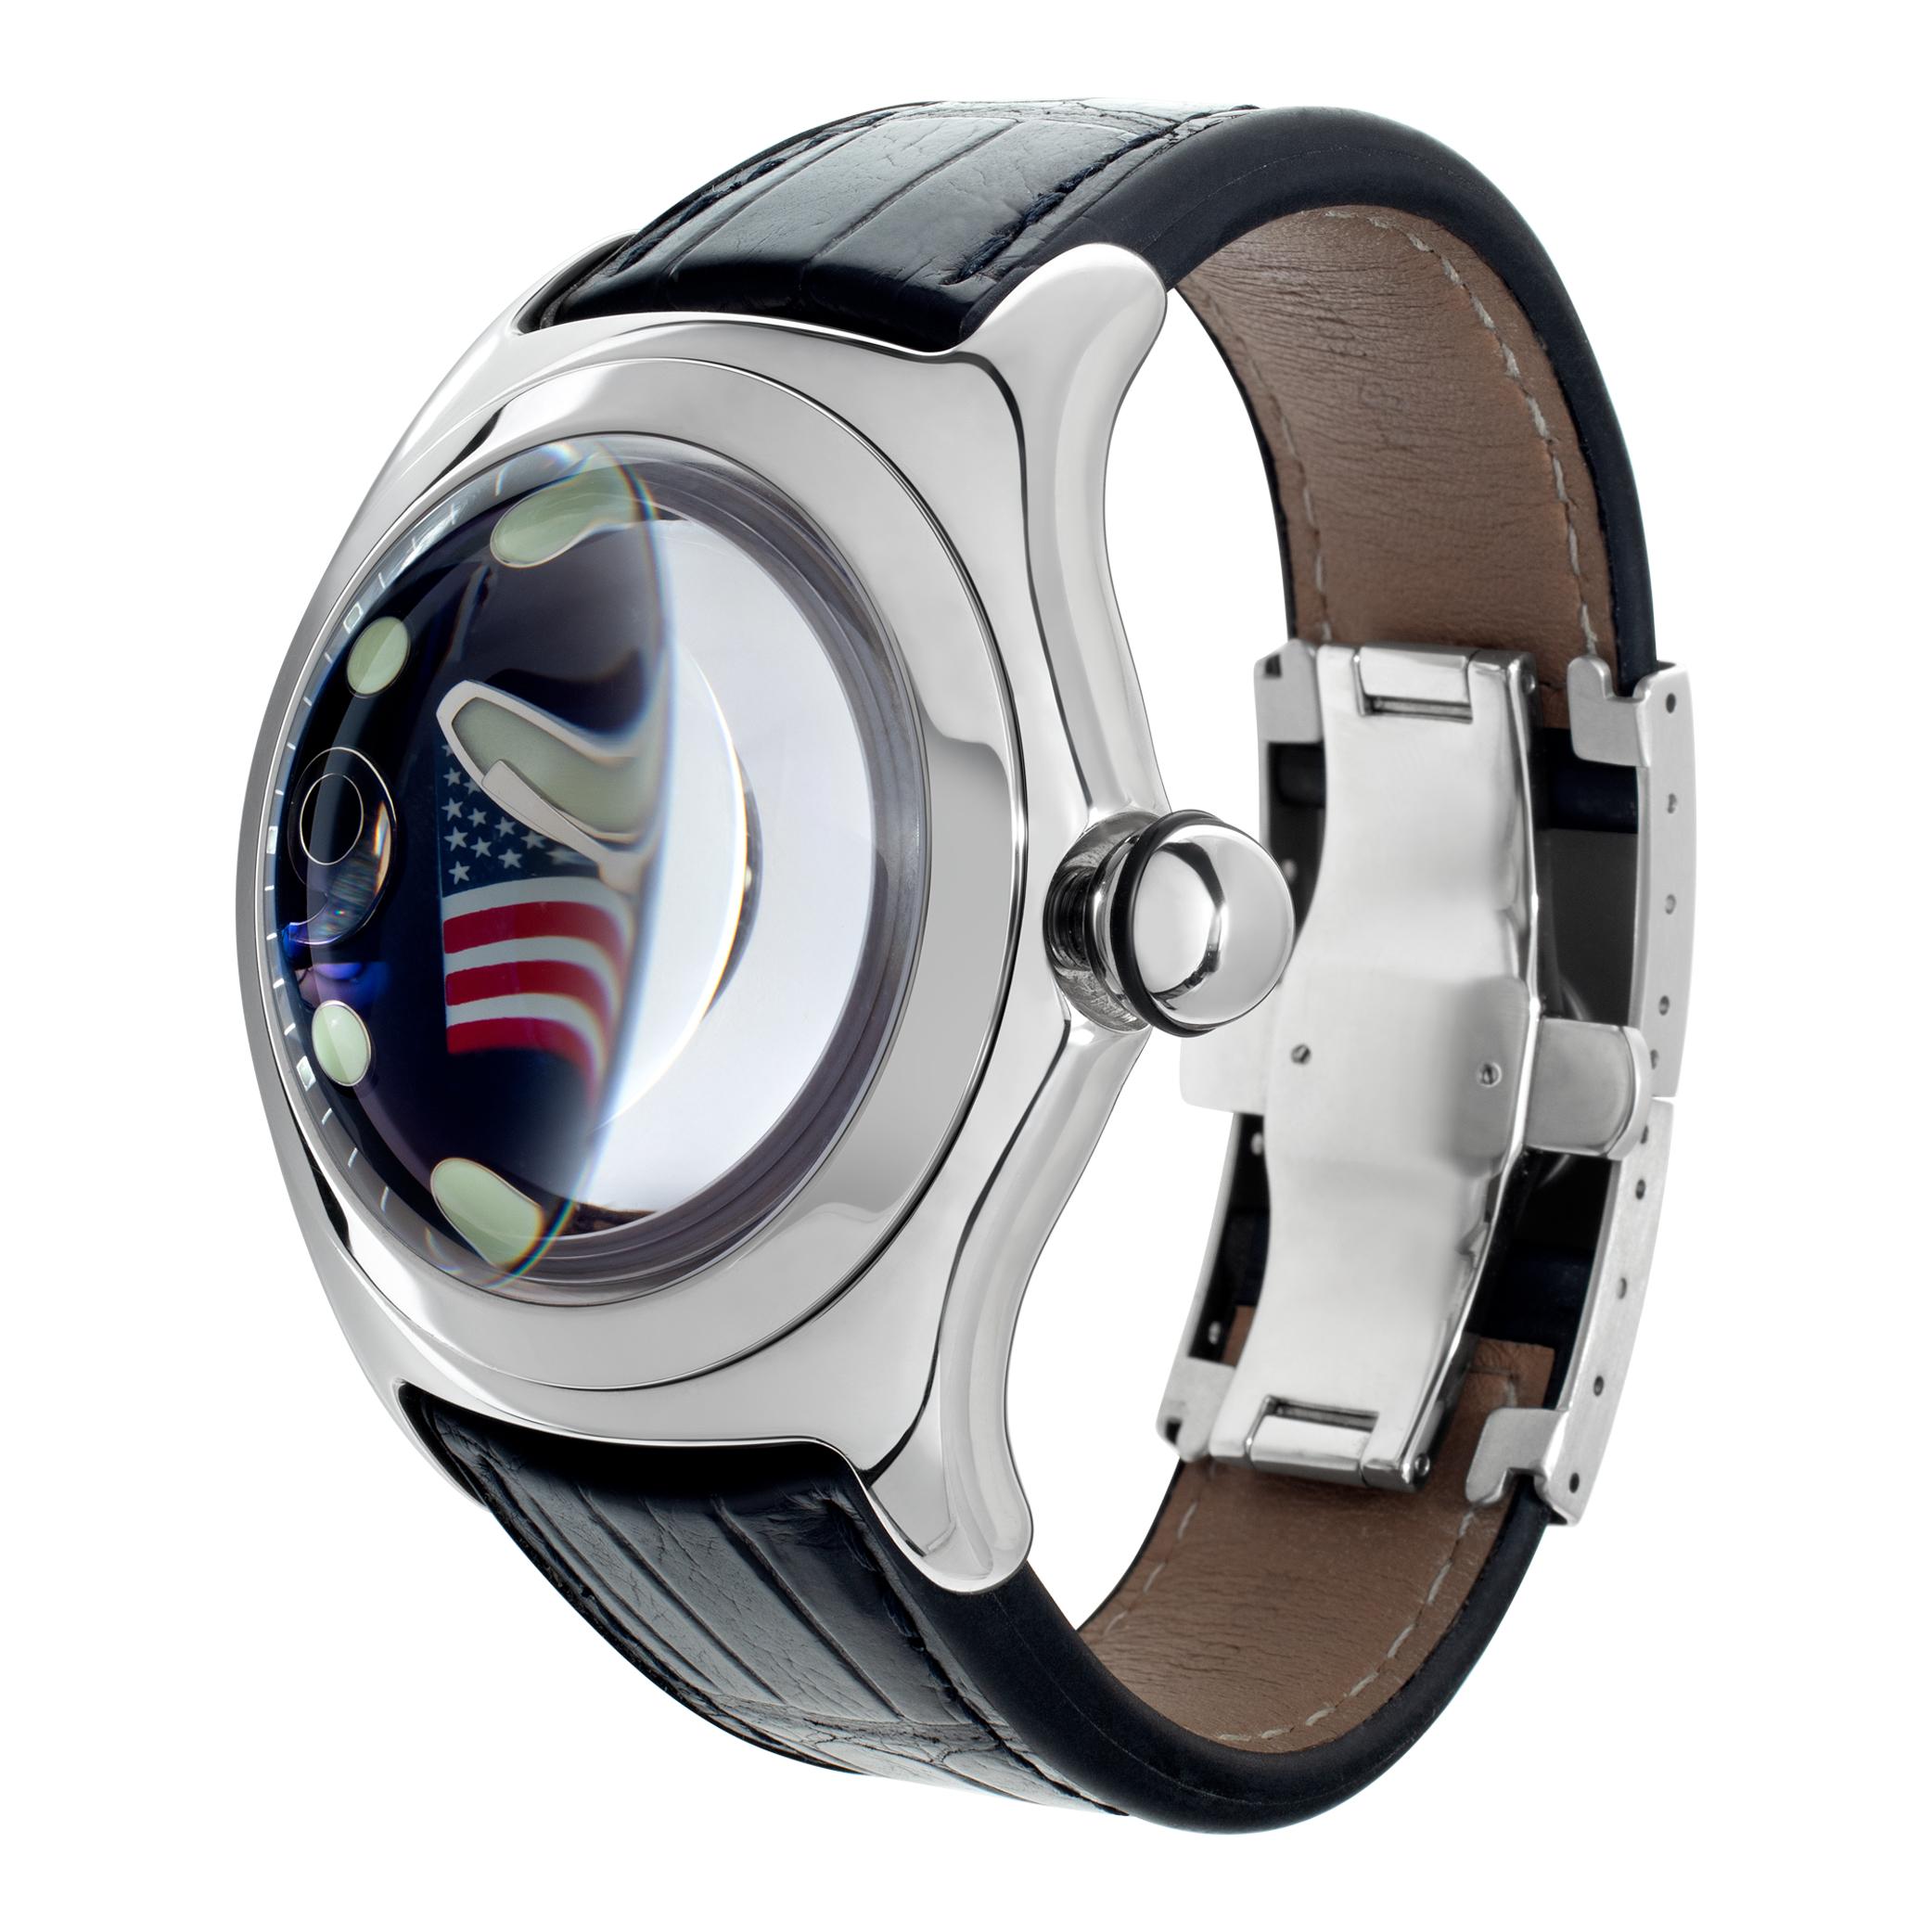 Corum Bubble with American flag dial in stainless steel on a black alligator strap. Quartz w/ sweep seconds and date. 44 mm case size. Ref 163.150.20. Fine Pre-owned Corum Watch.

 Certified preowned Sport Corum Bubble 163.150.20 watch is made out